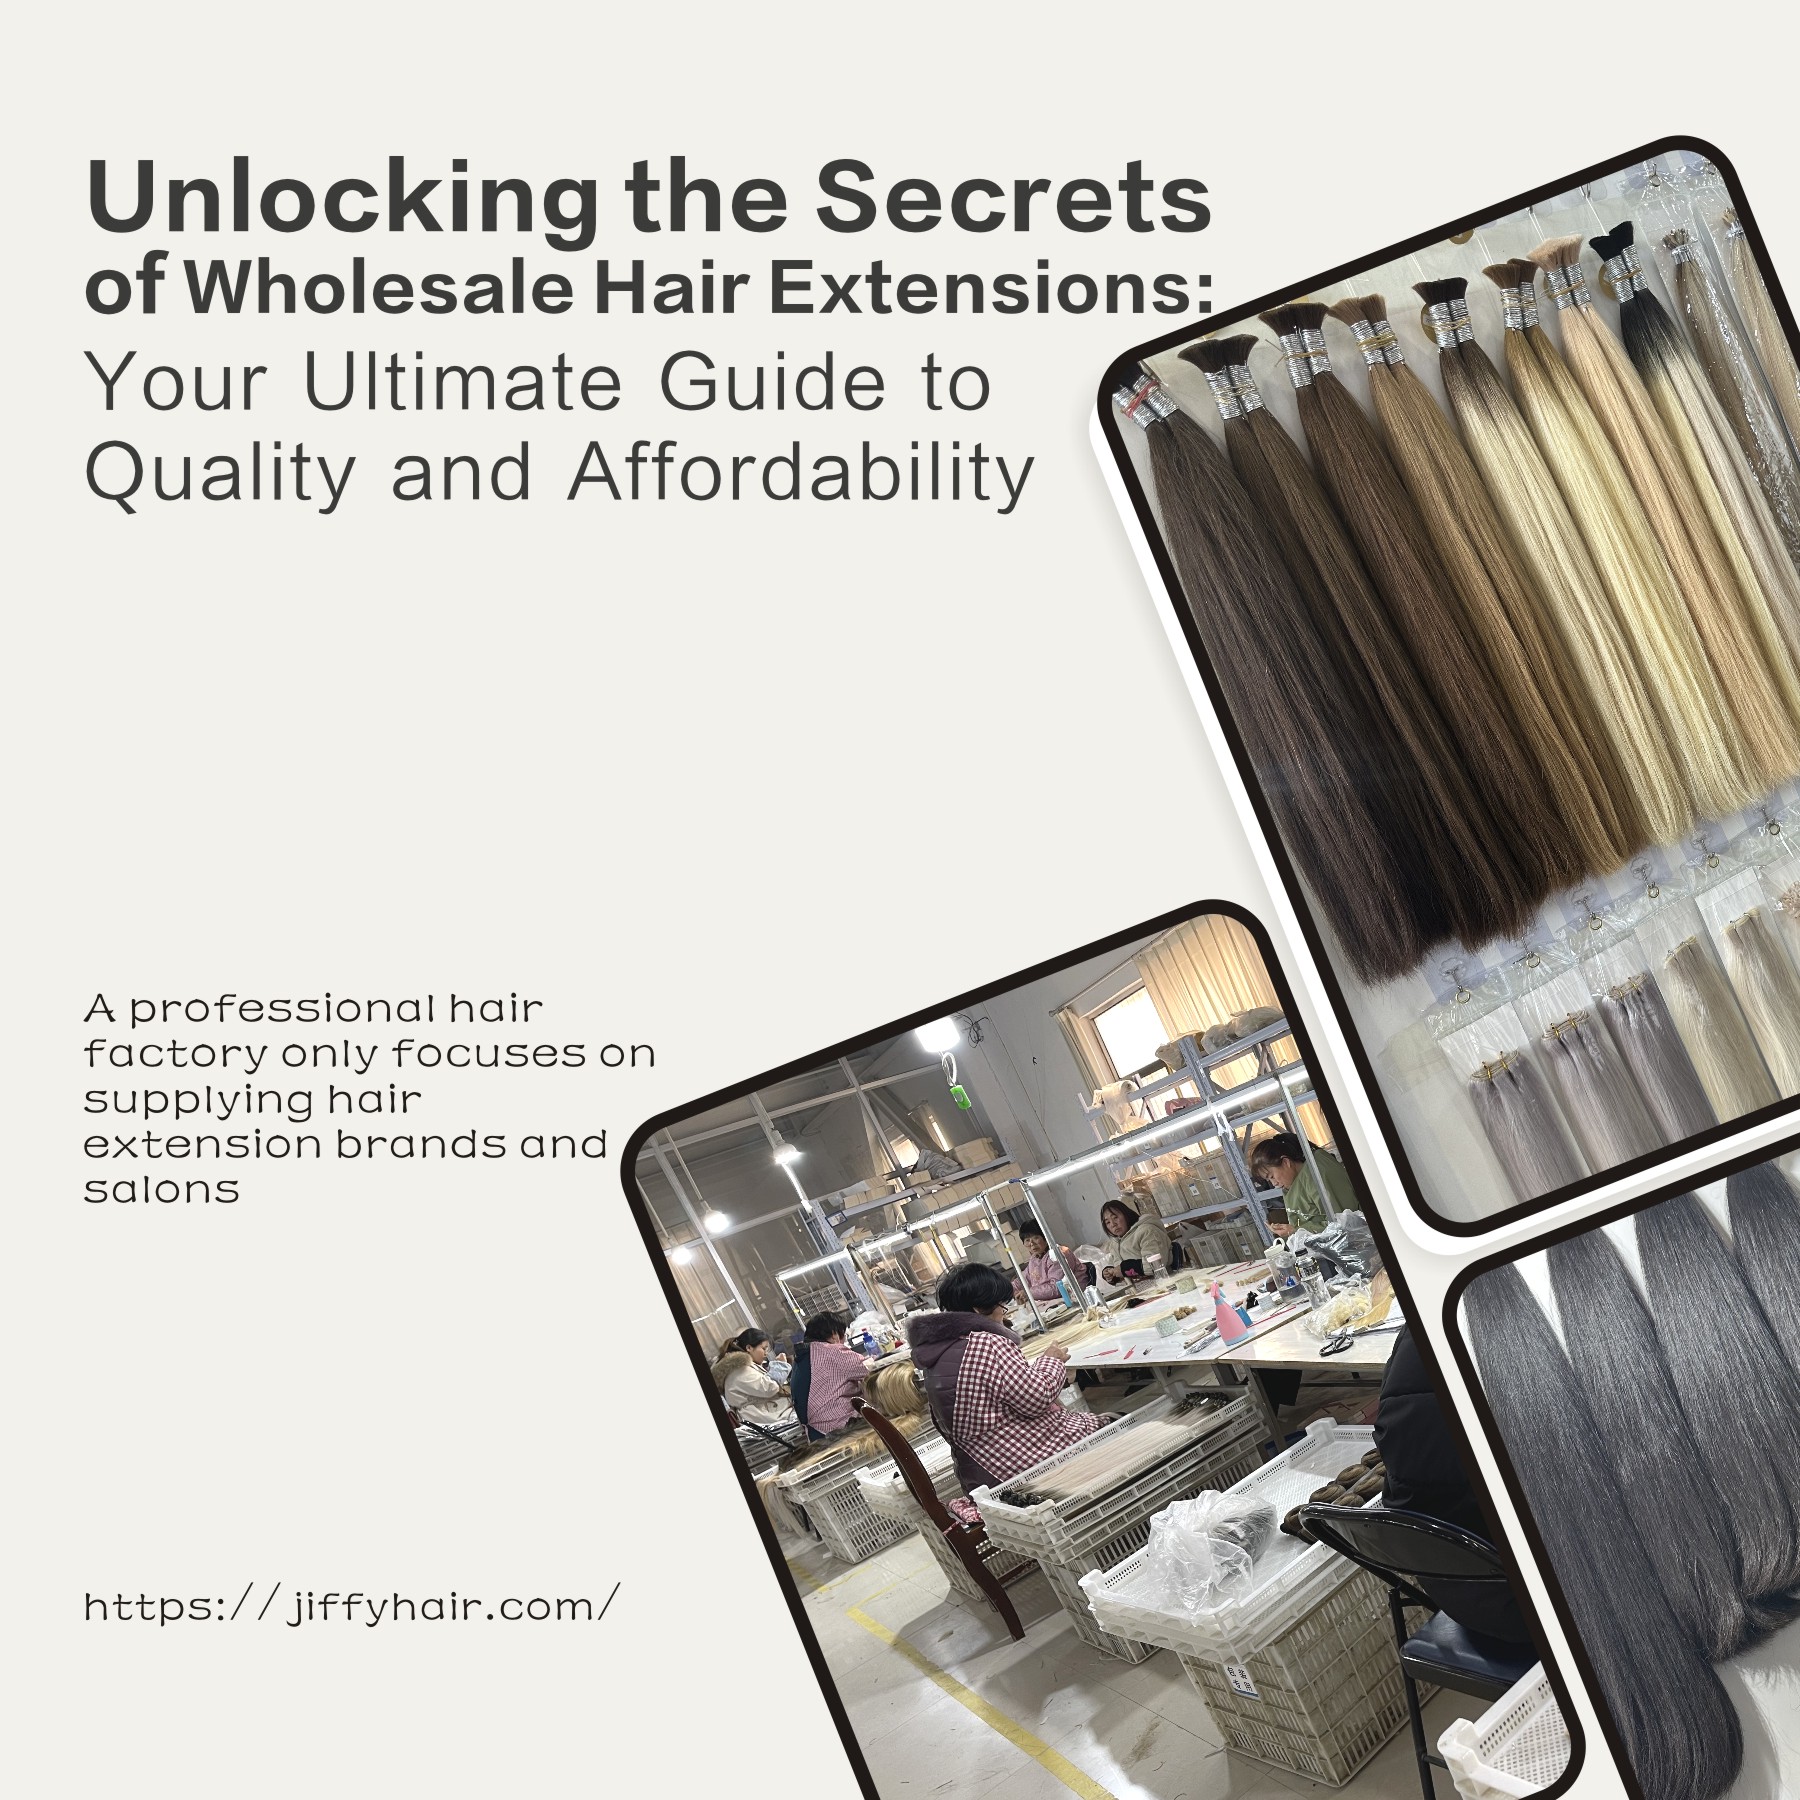 Unlocking the Secrets of Wholesale Hair Extensions